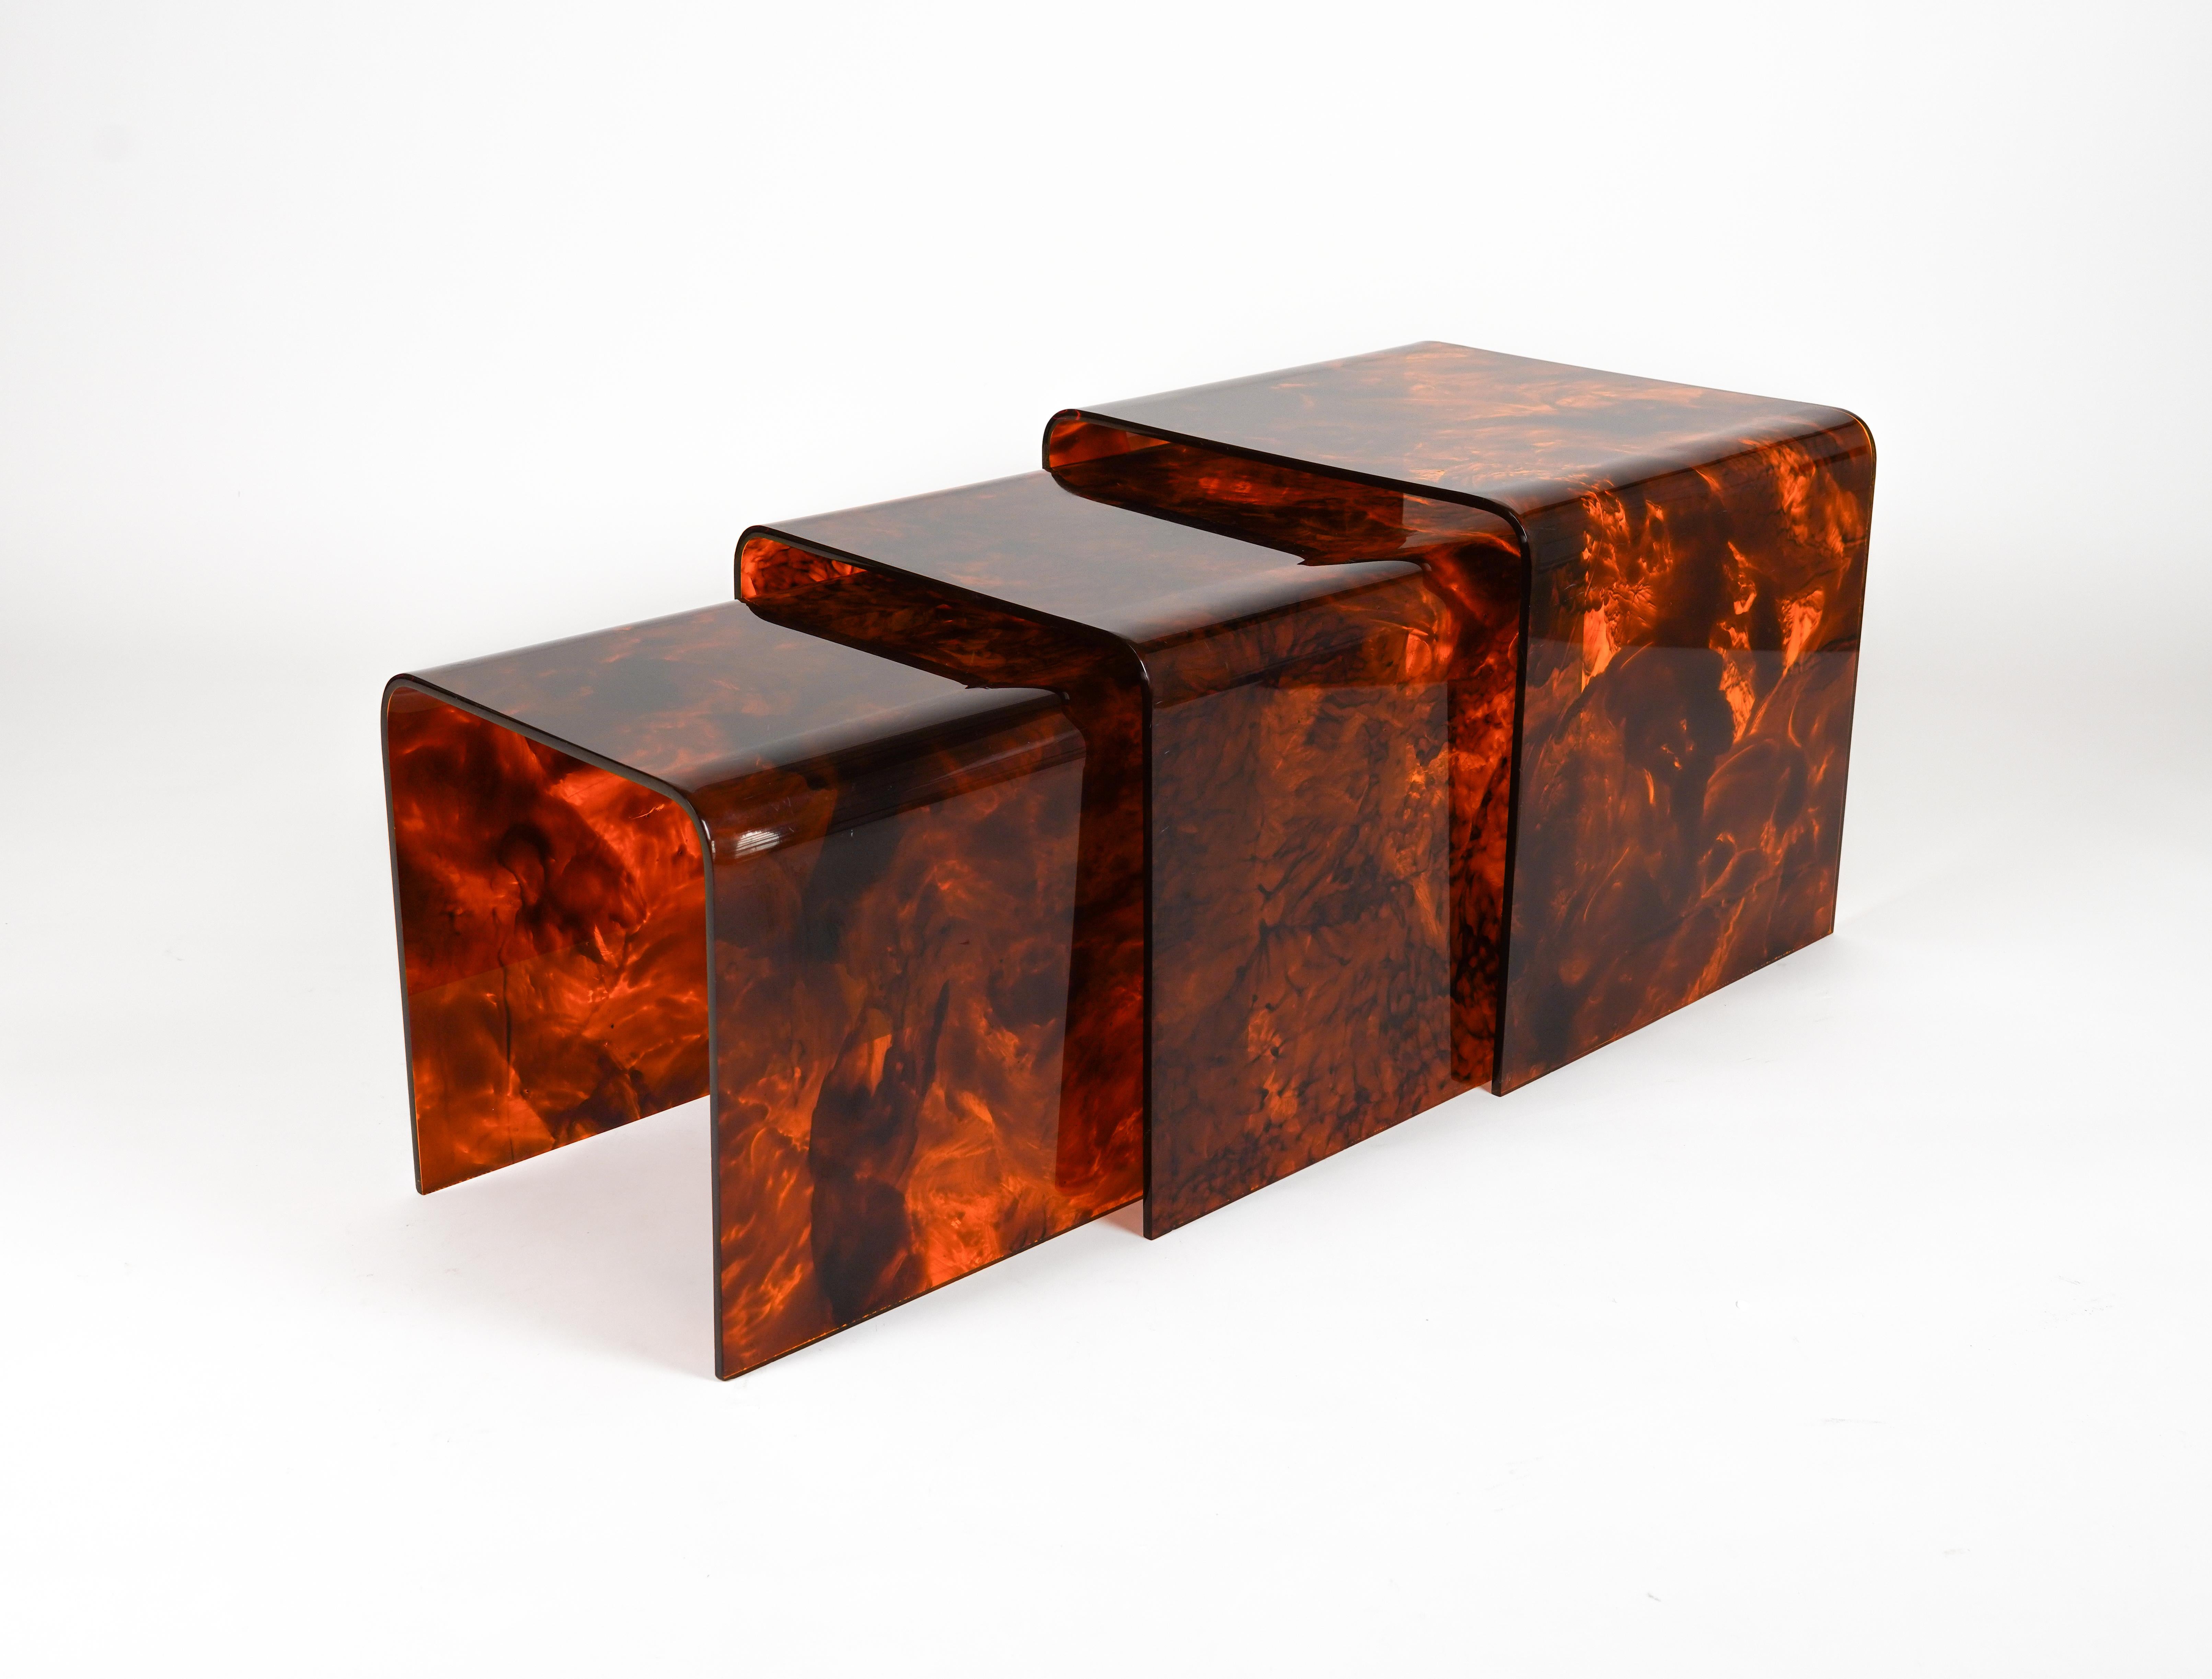 Italian Set of 3 Nesting Tables in Lucite Faux Tortoiseshell Christian Dior, Italy 1970s For Sale